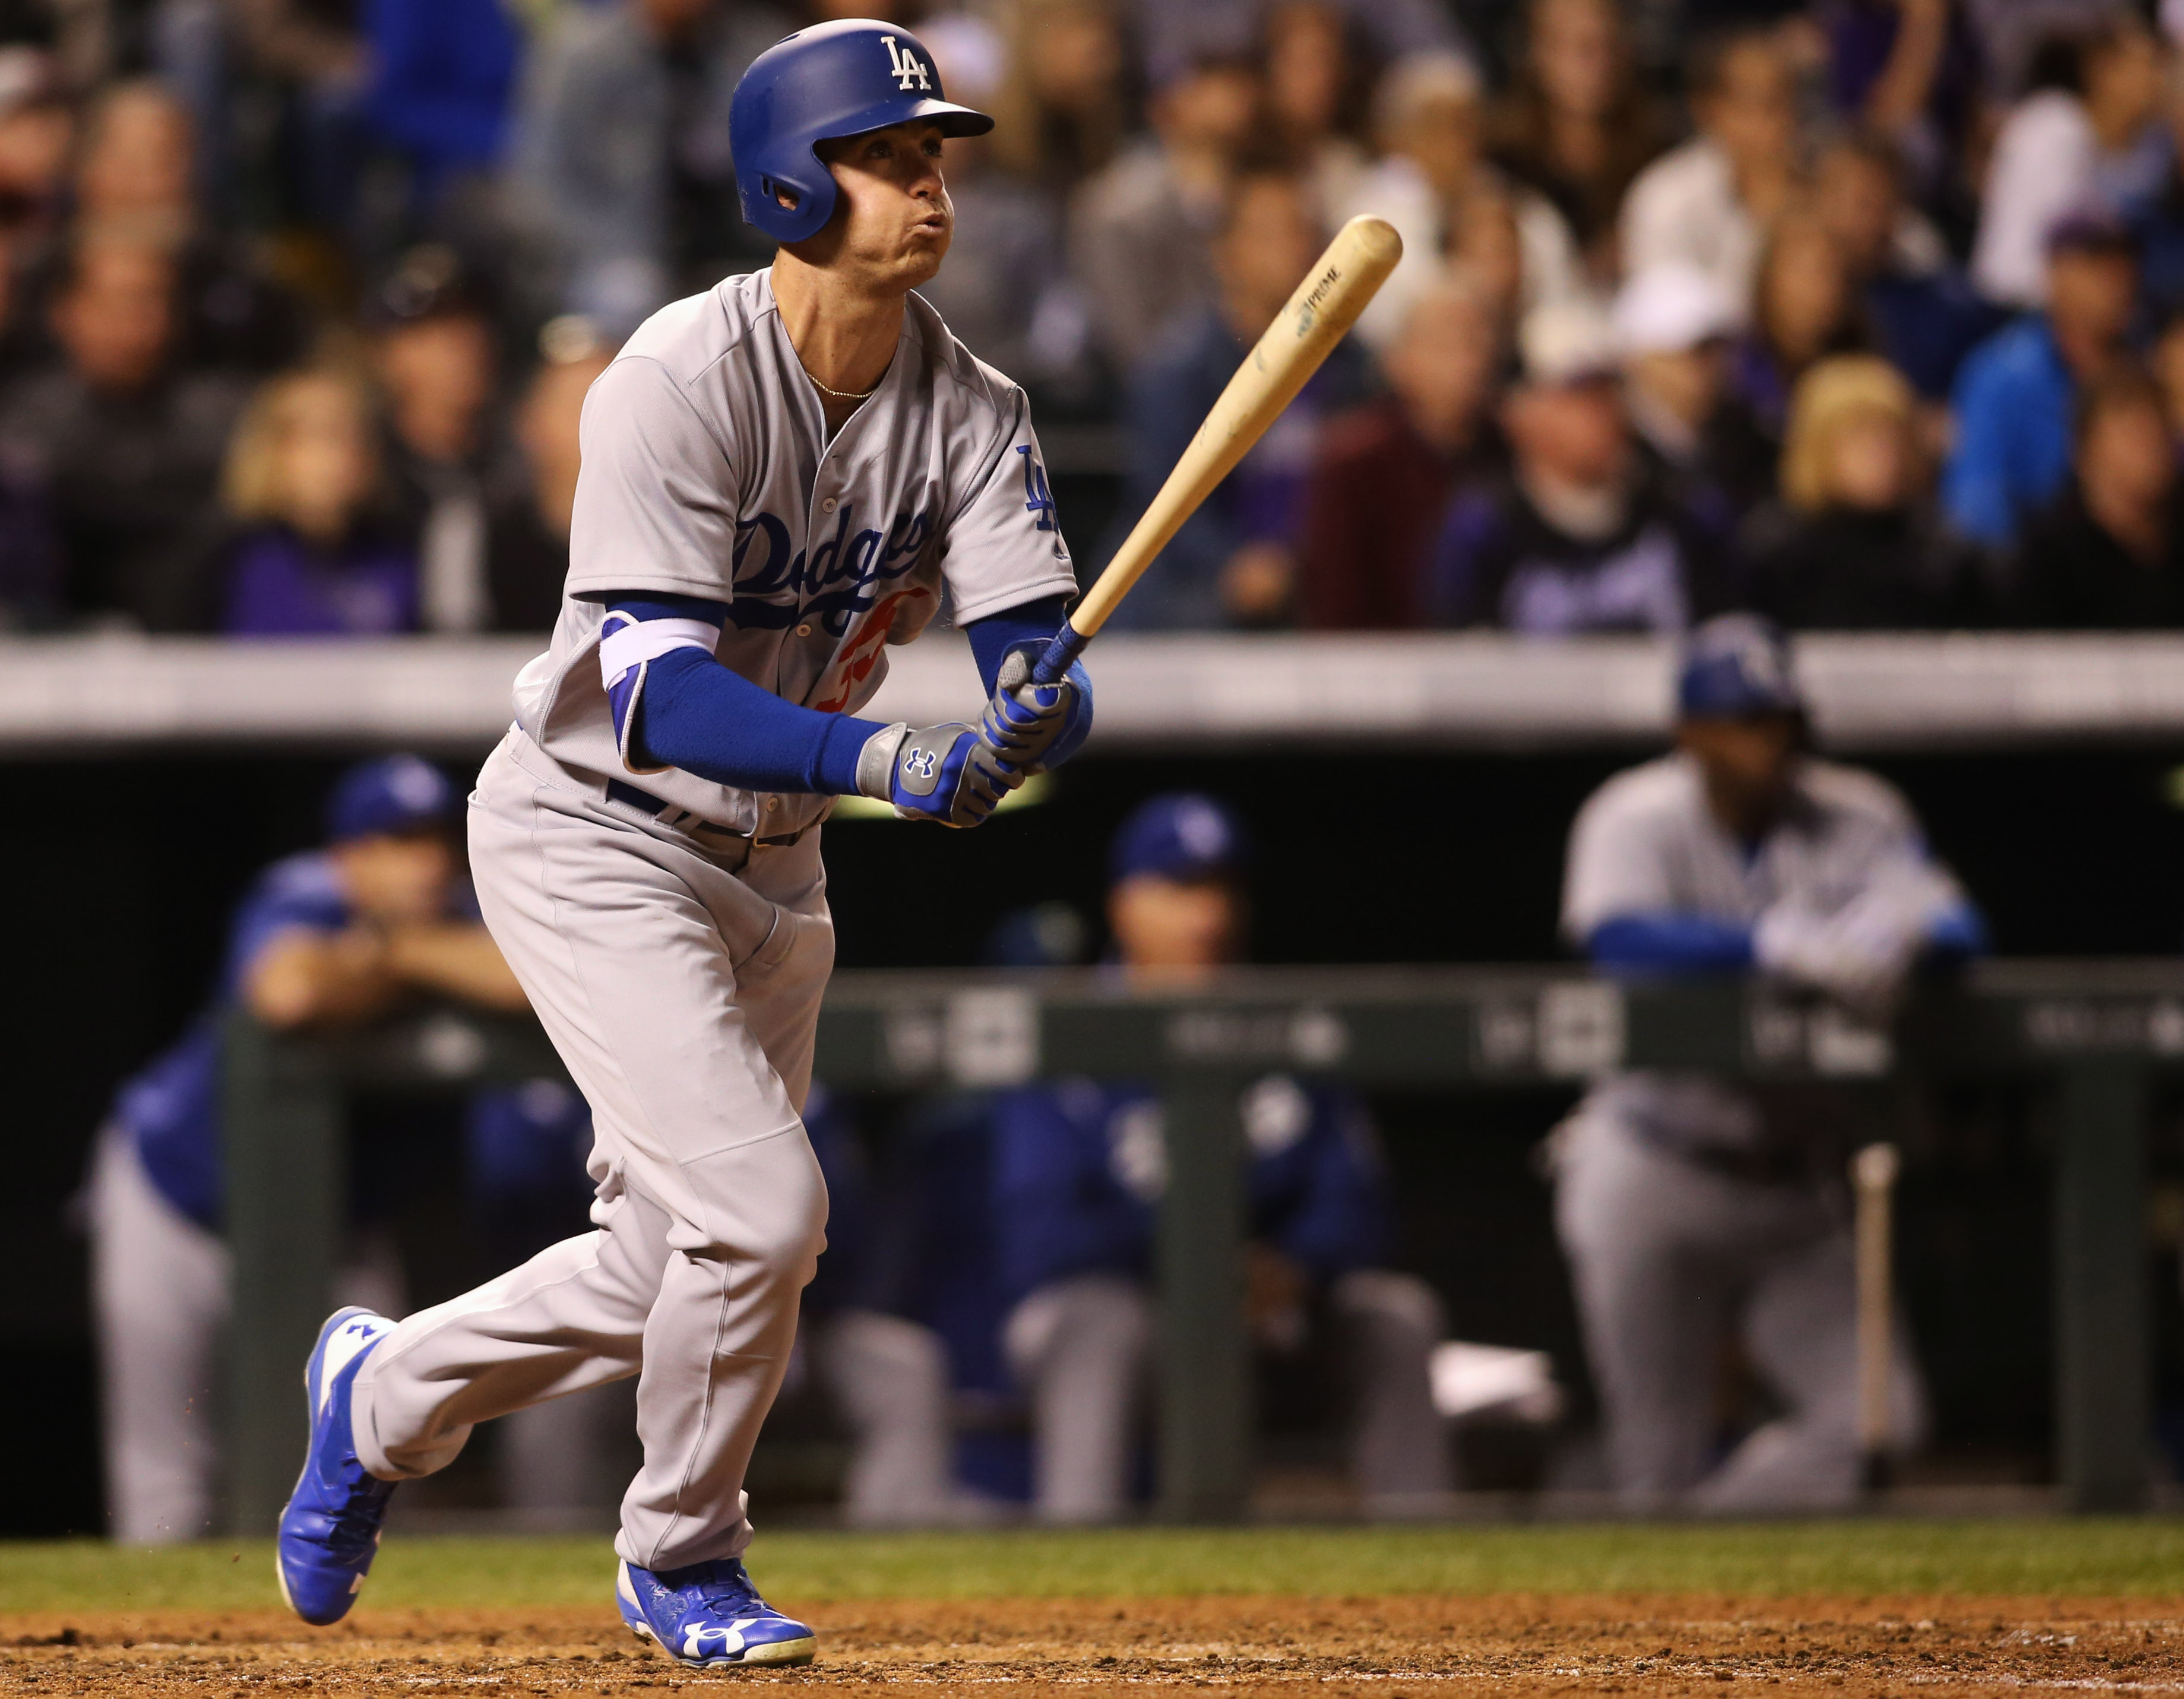 Watch: Cody Bellinger hits two home runs in Dodgers' walk-off win